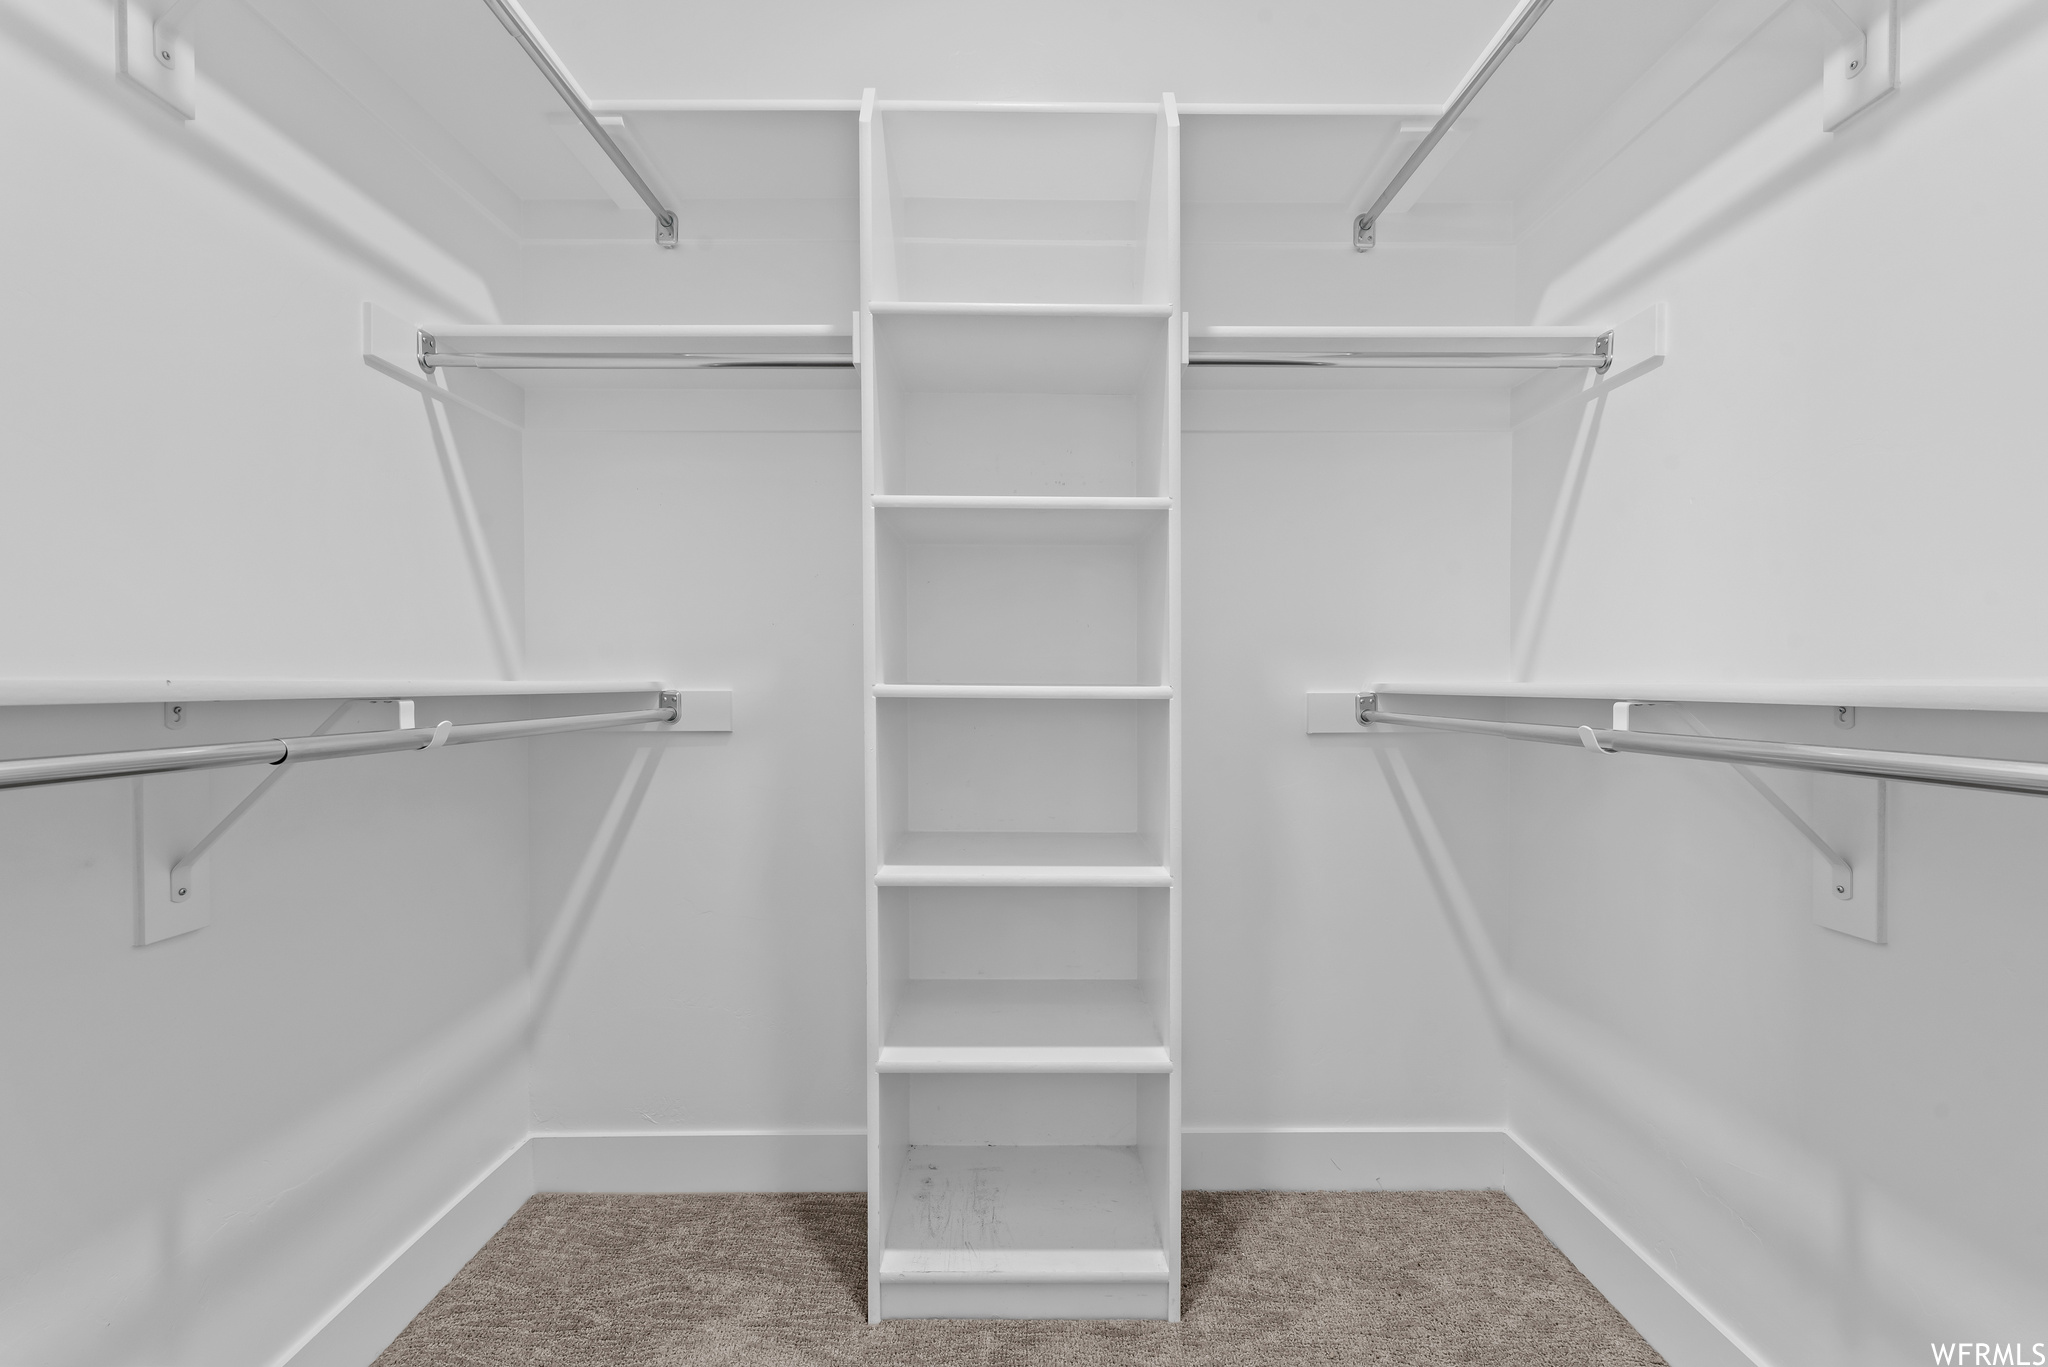 downstairs bedrooms sport large walk in closets